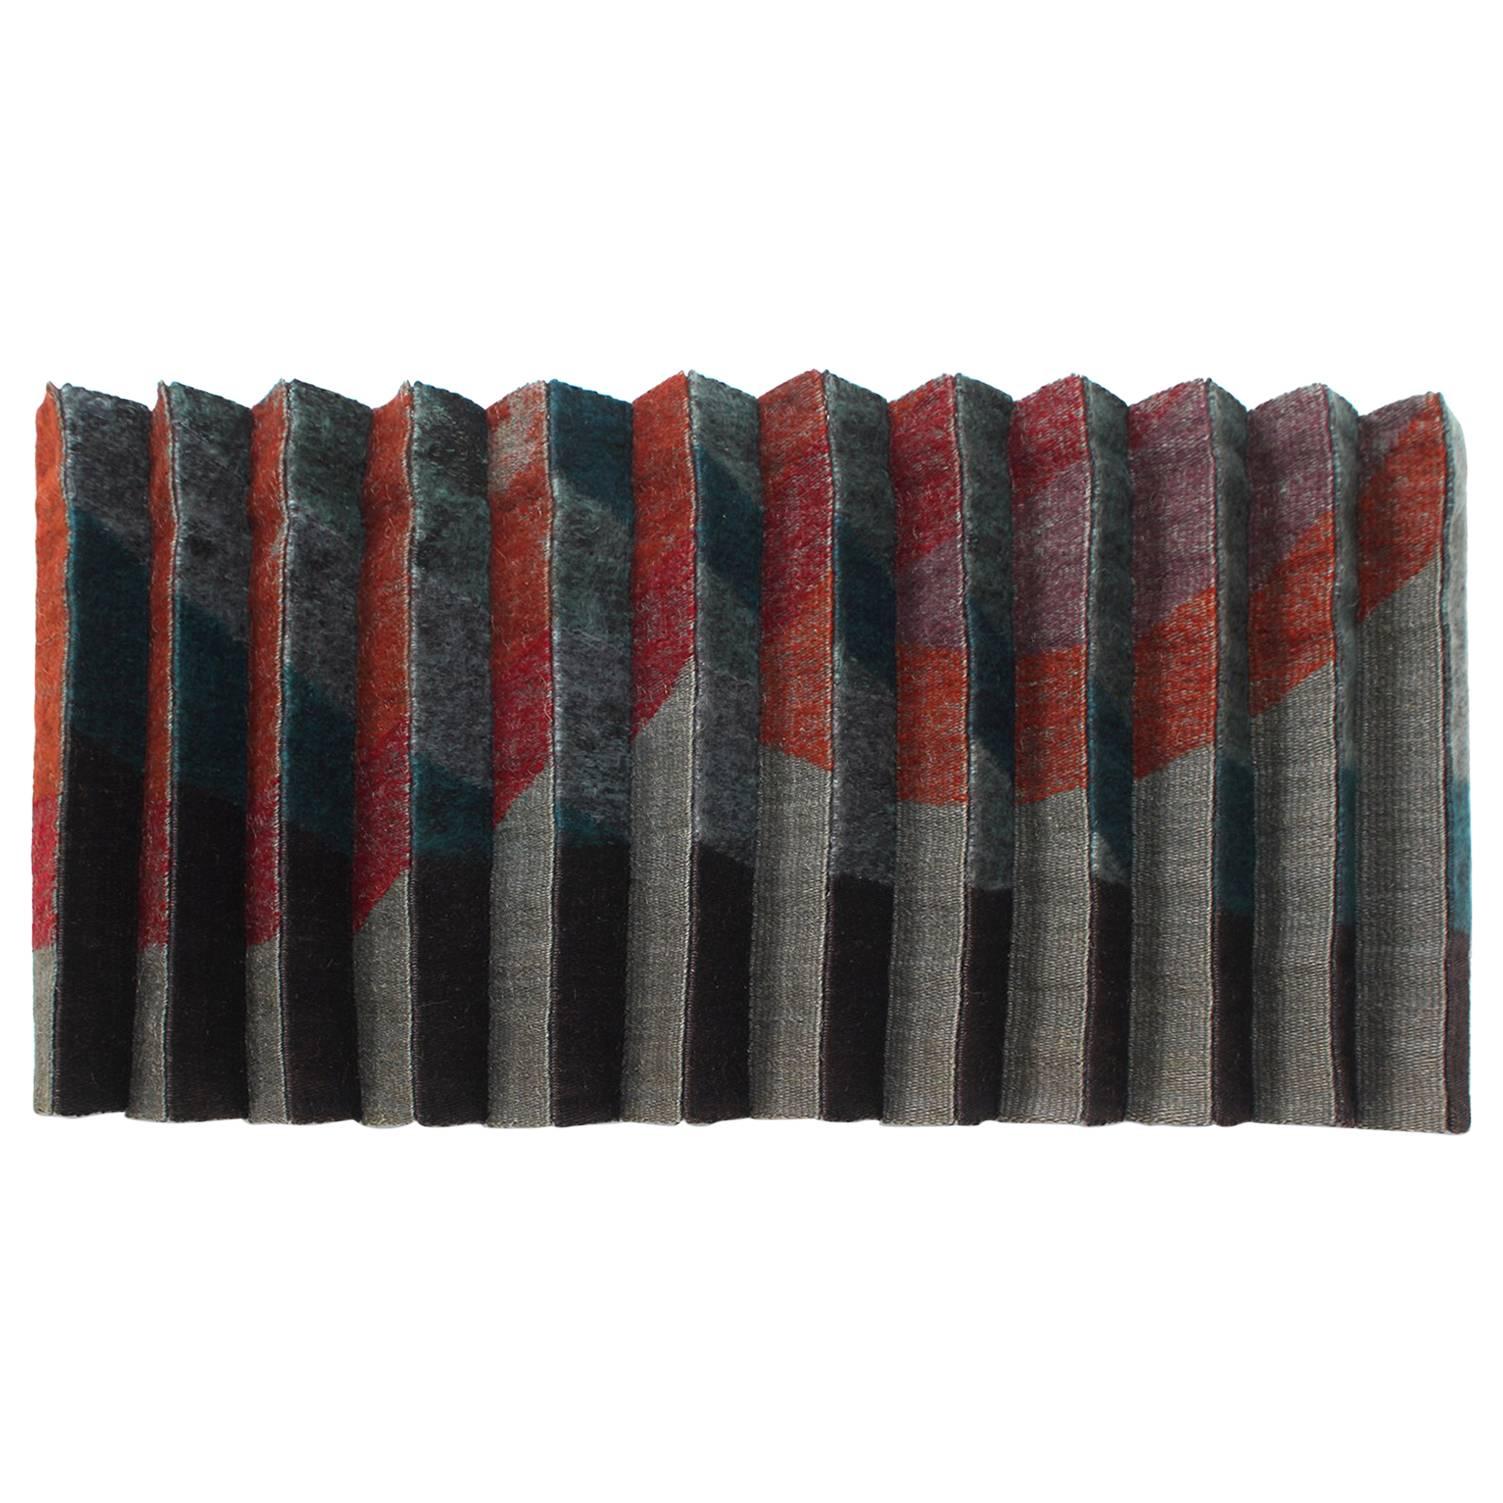 A Wall Mounted Three Dimensional Accordian Tapestry/Textile Art